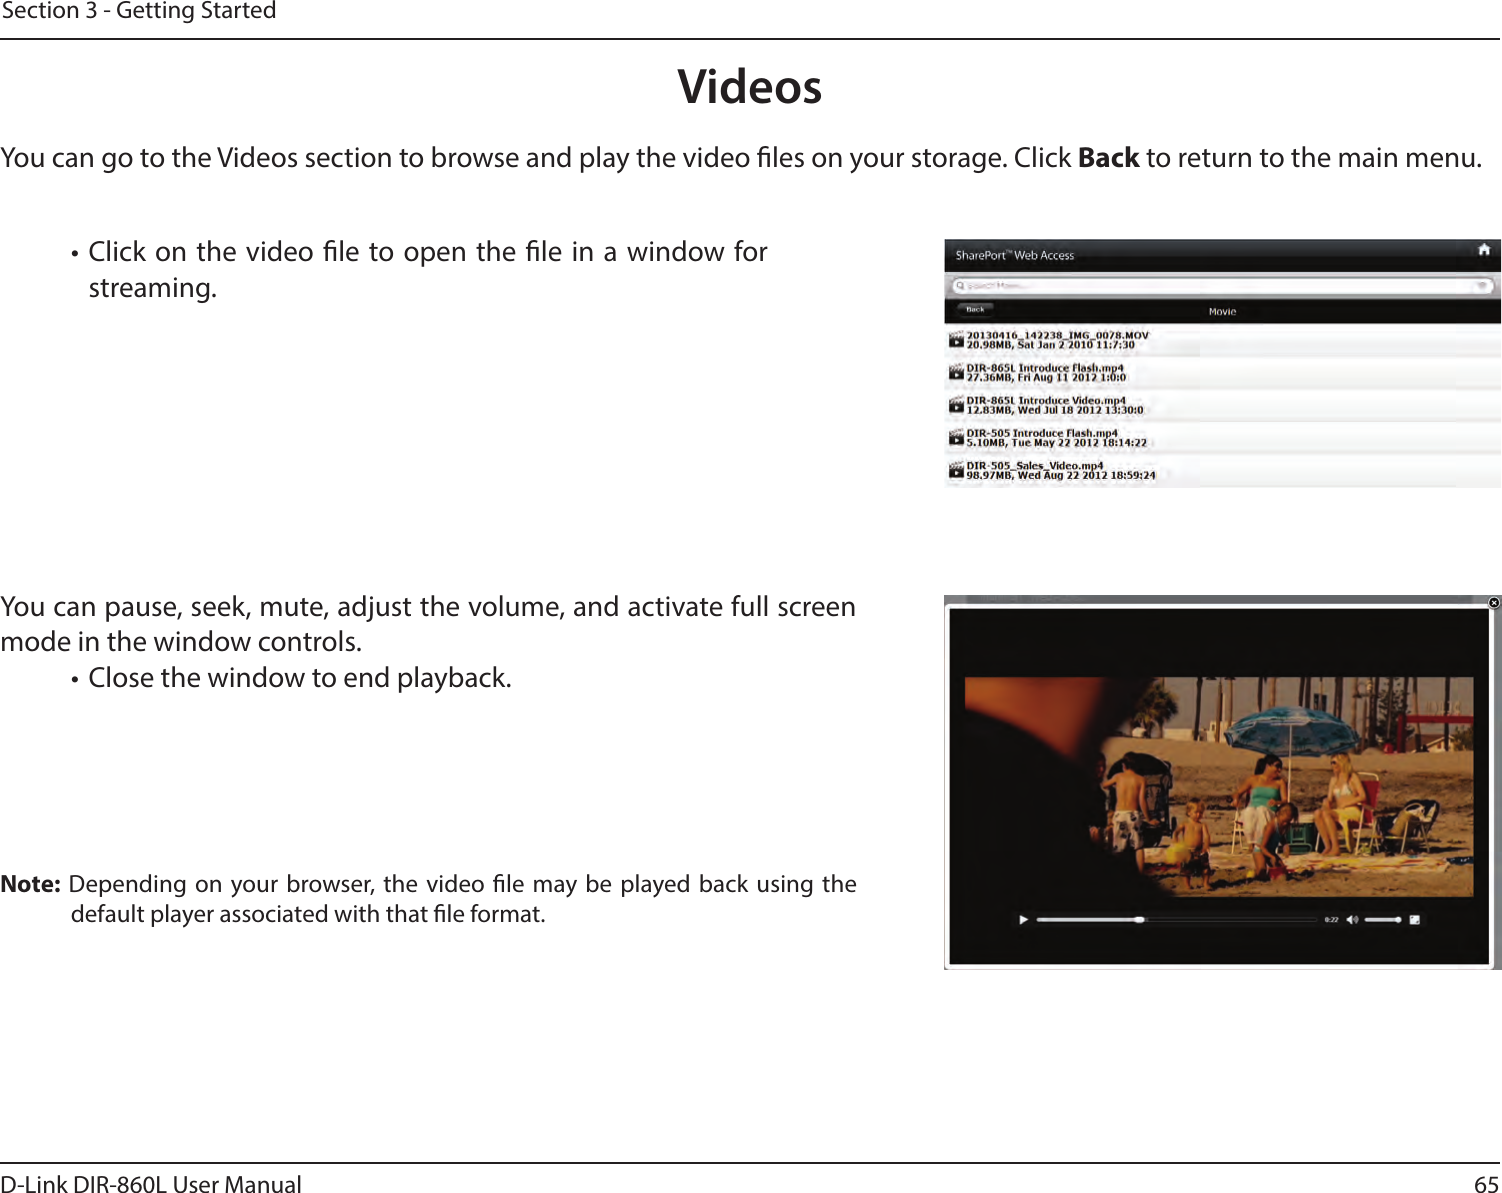 65D-Link DIR-860L User ManualSection 3 - Getting StartedVideosYou can go to the Videos section to browse and play the video les on your storage. Click Back to return to the main menu.• Click on the video le to open the le in a window for streaming.You can pause, seek, mute, adjust the volume, and activate full screen mode in the window controls.• Close the window to end playback.Note: Depending on your browser, the video le may be played back using the default player associated with that le format.